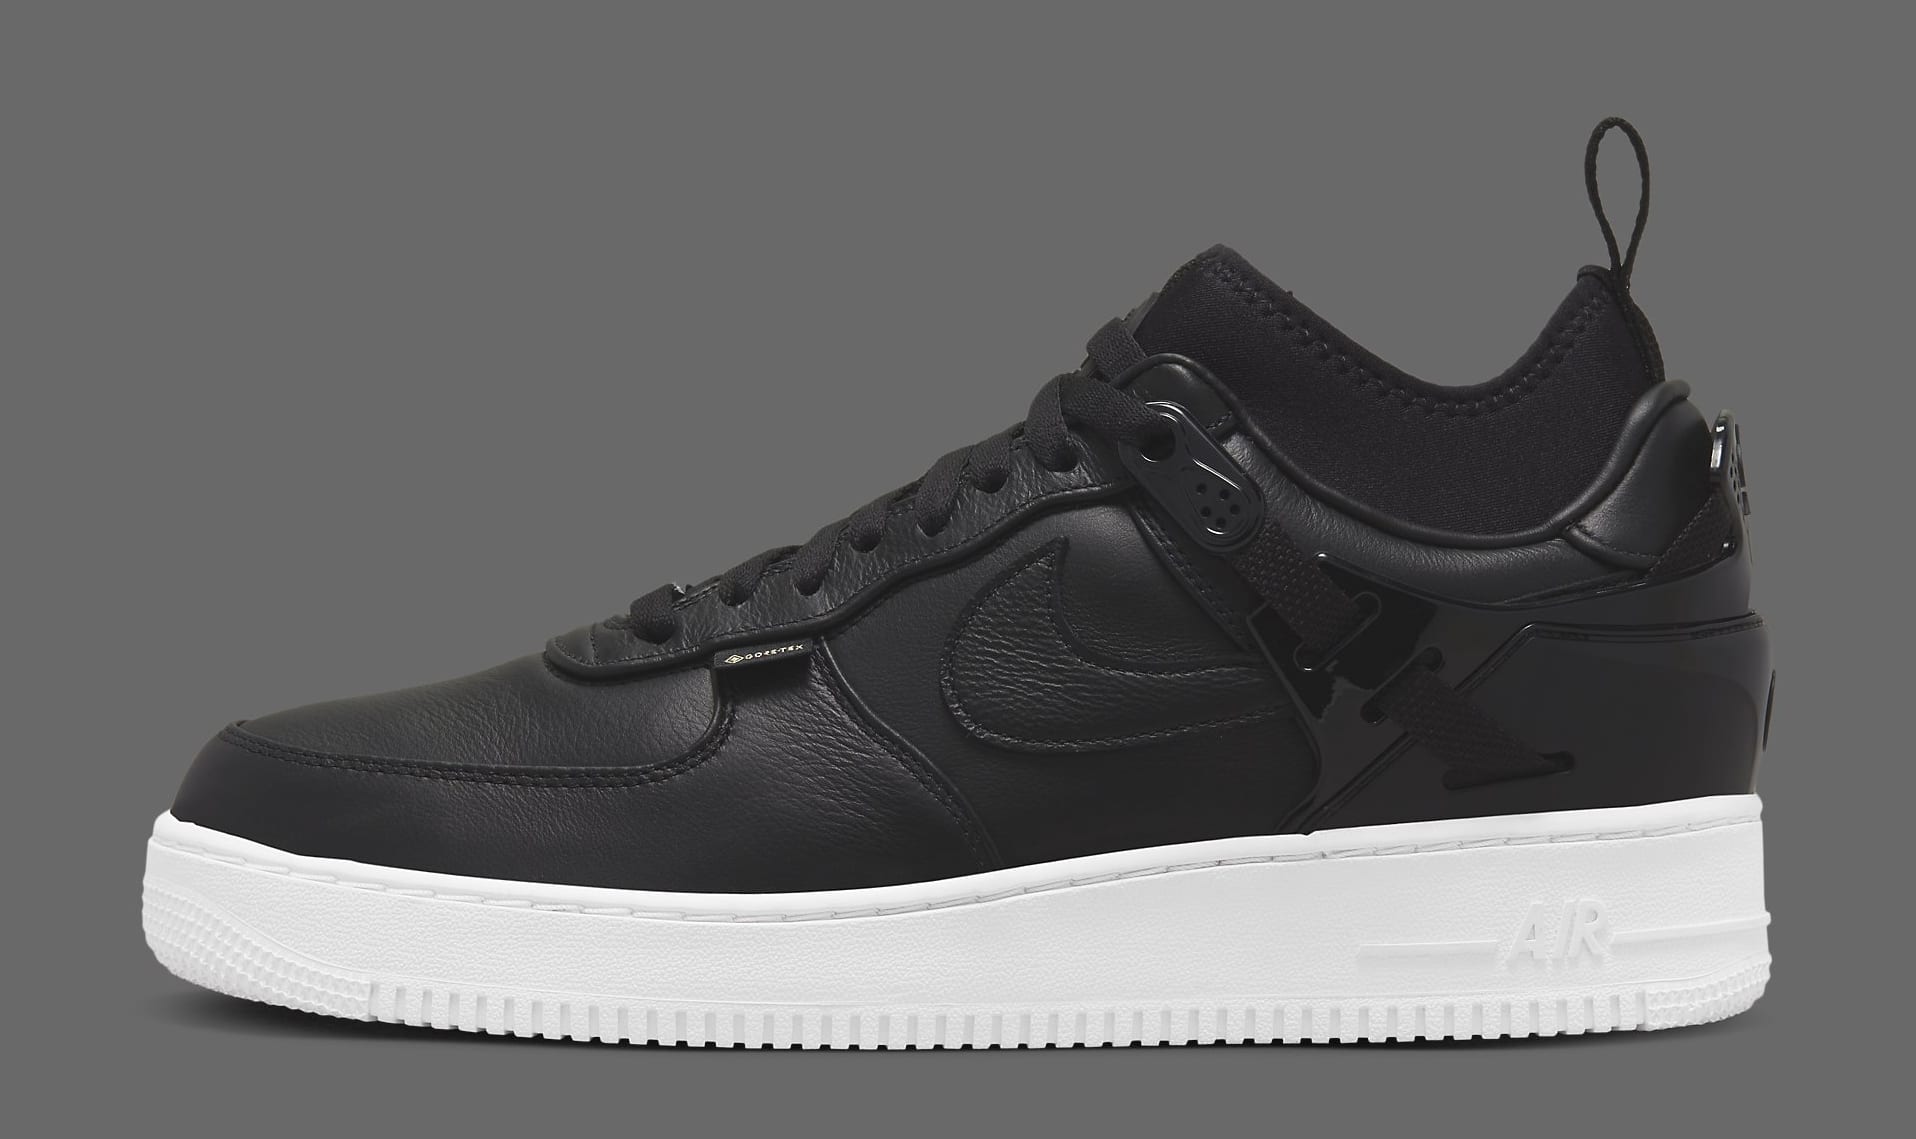 Undercover x Nike Air Force 1 Low - Sneaker Release Guide 10/11/22